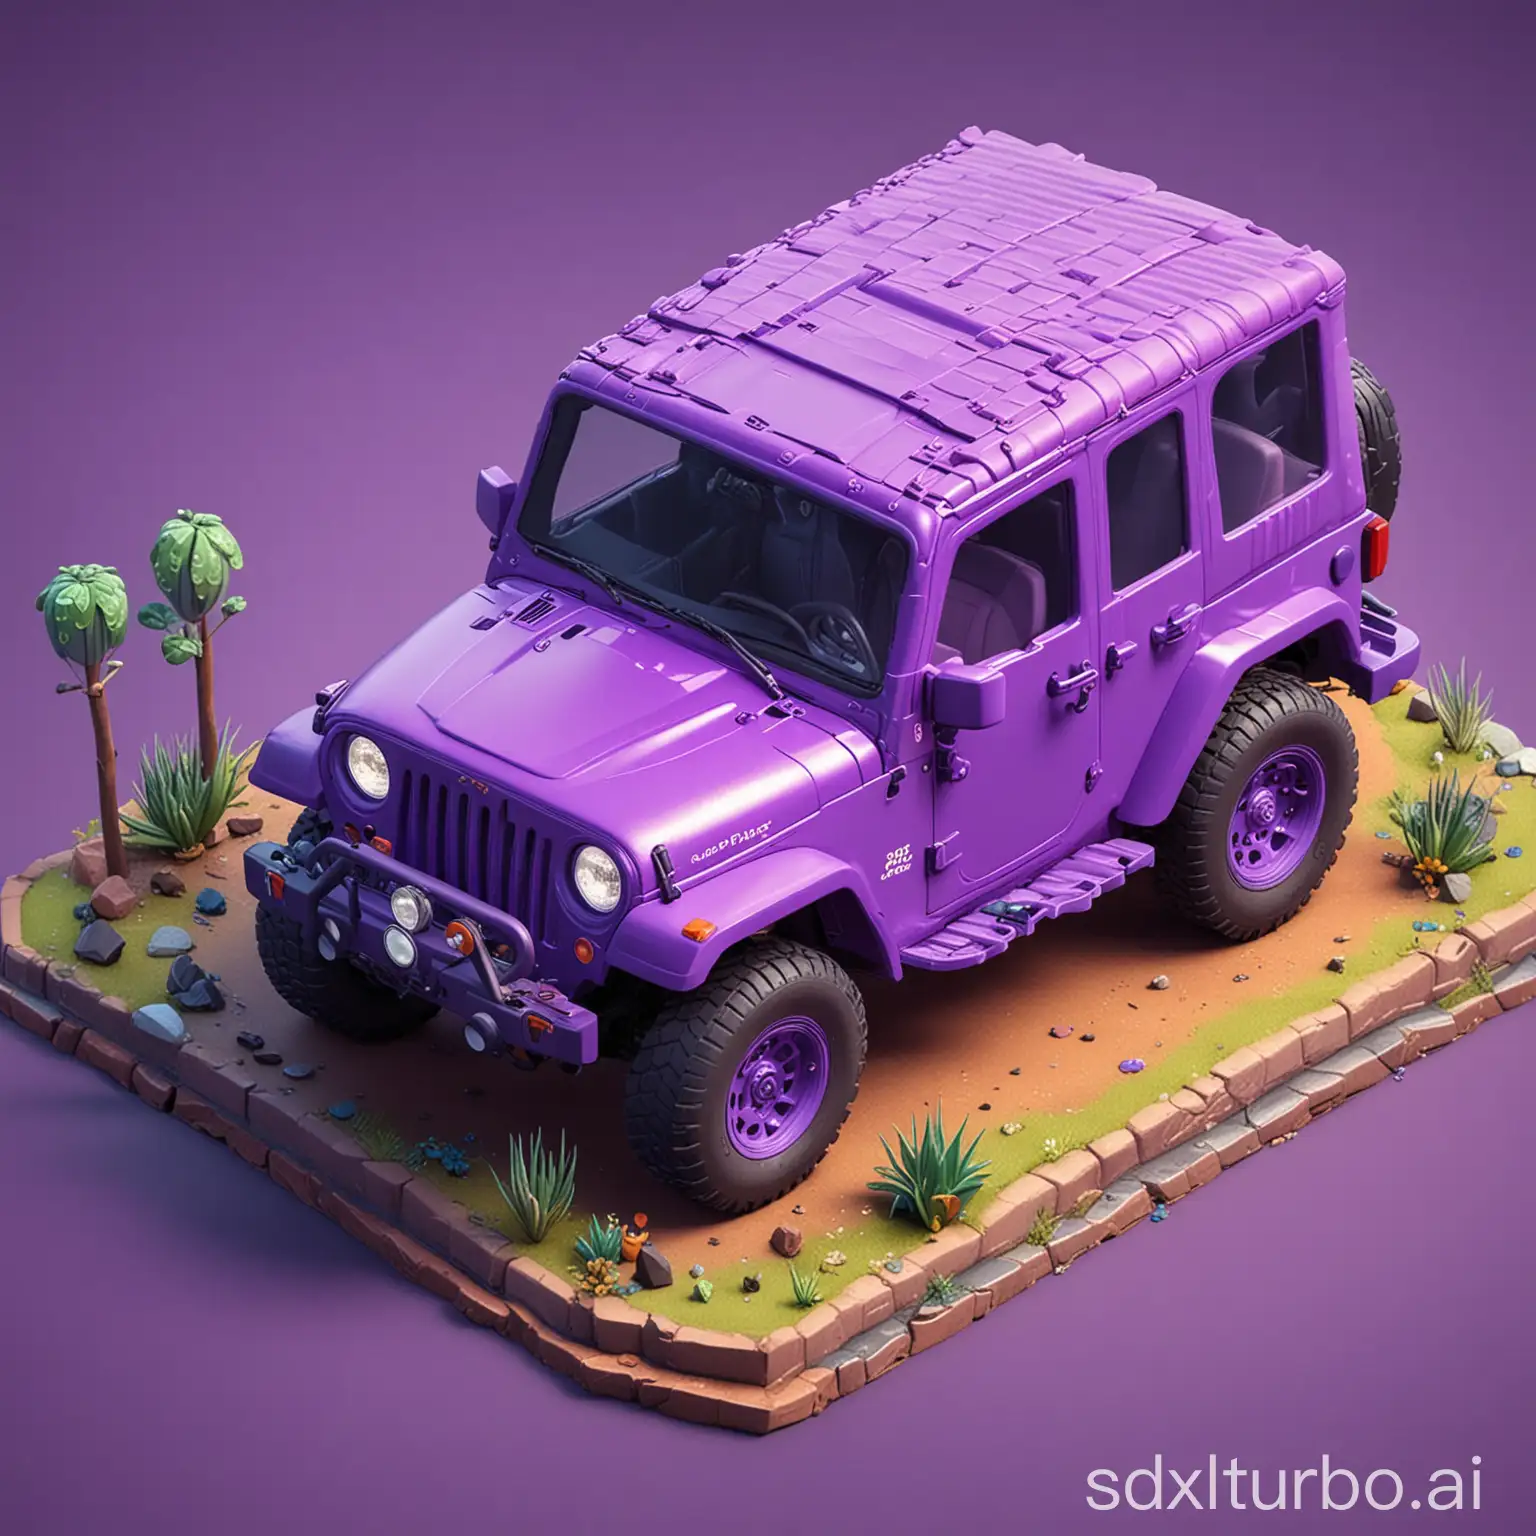 Isometric-Purple-Jeep-with-Passenger-in-Pixar-Style